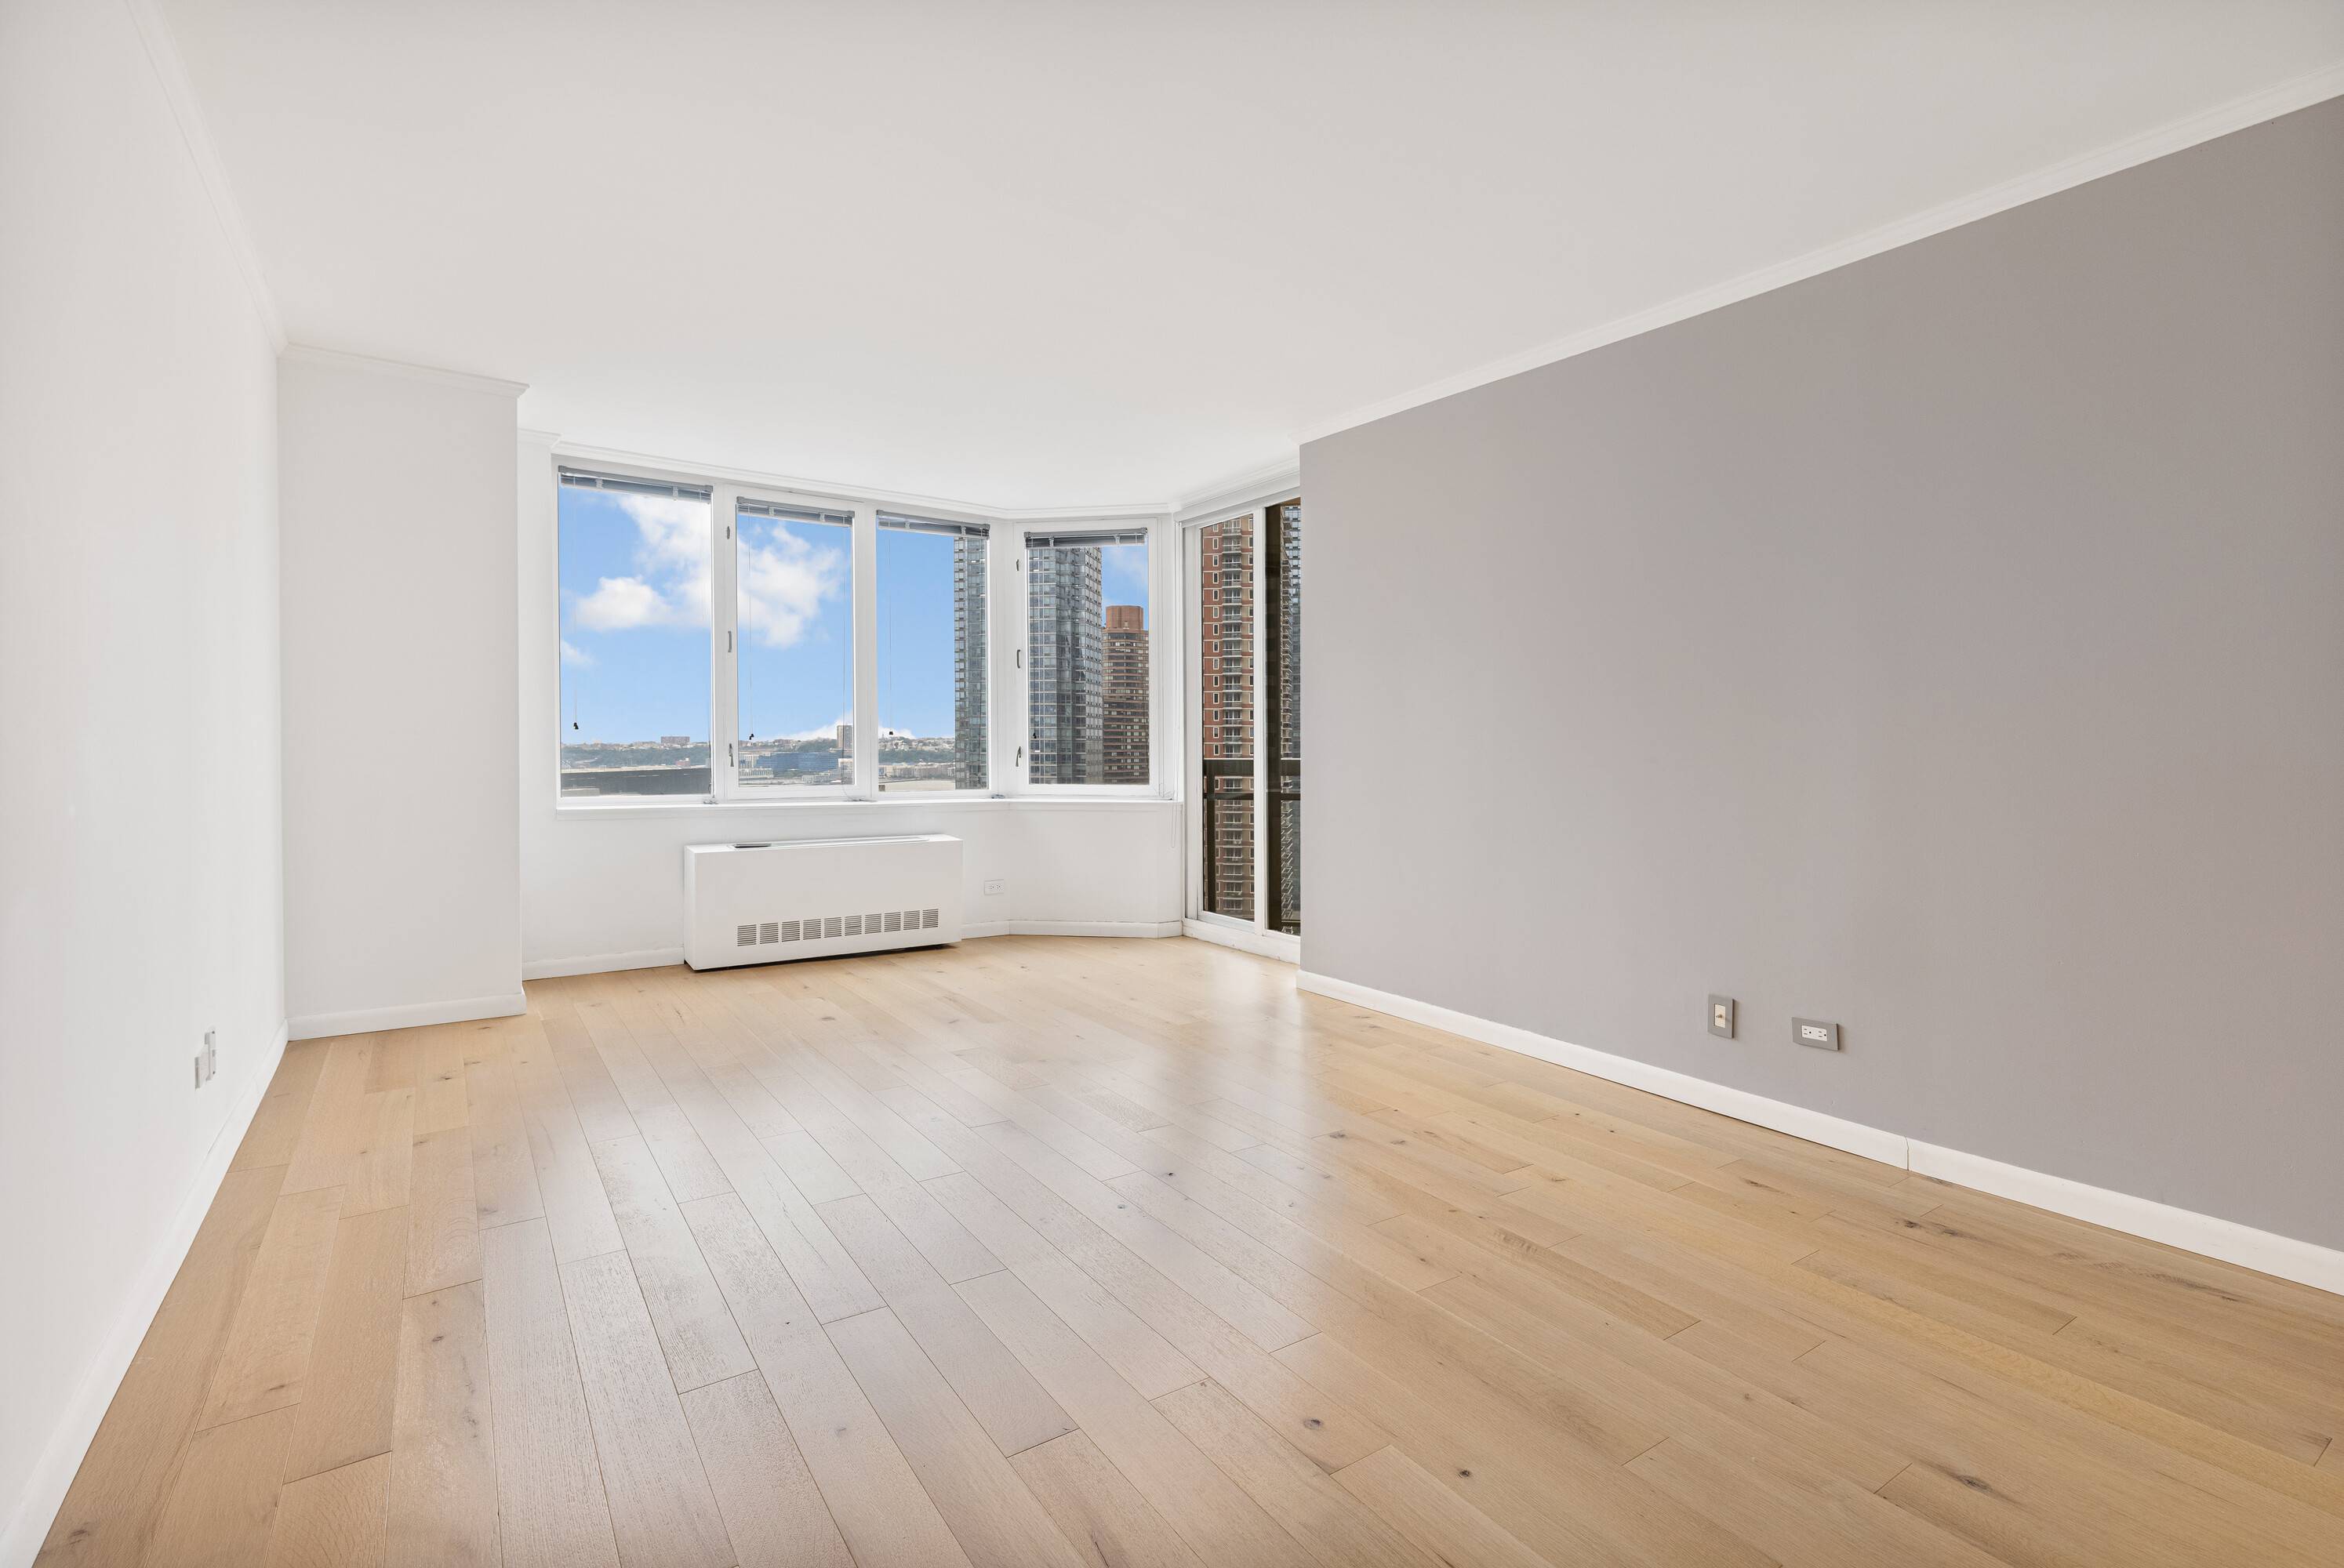 NEW LISTING !!! Sun-filled, renovated 1 bed. in HELLS KITCHEN with water views, balcony, SWIMMING POOL.